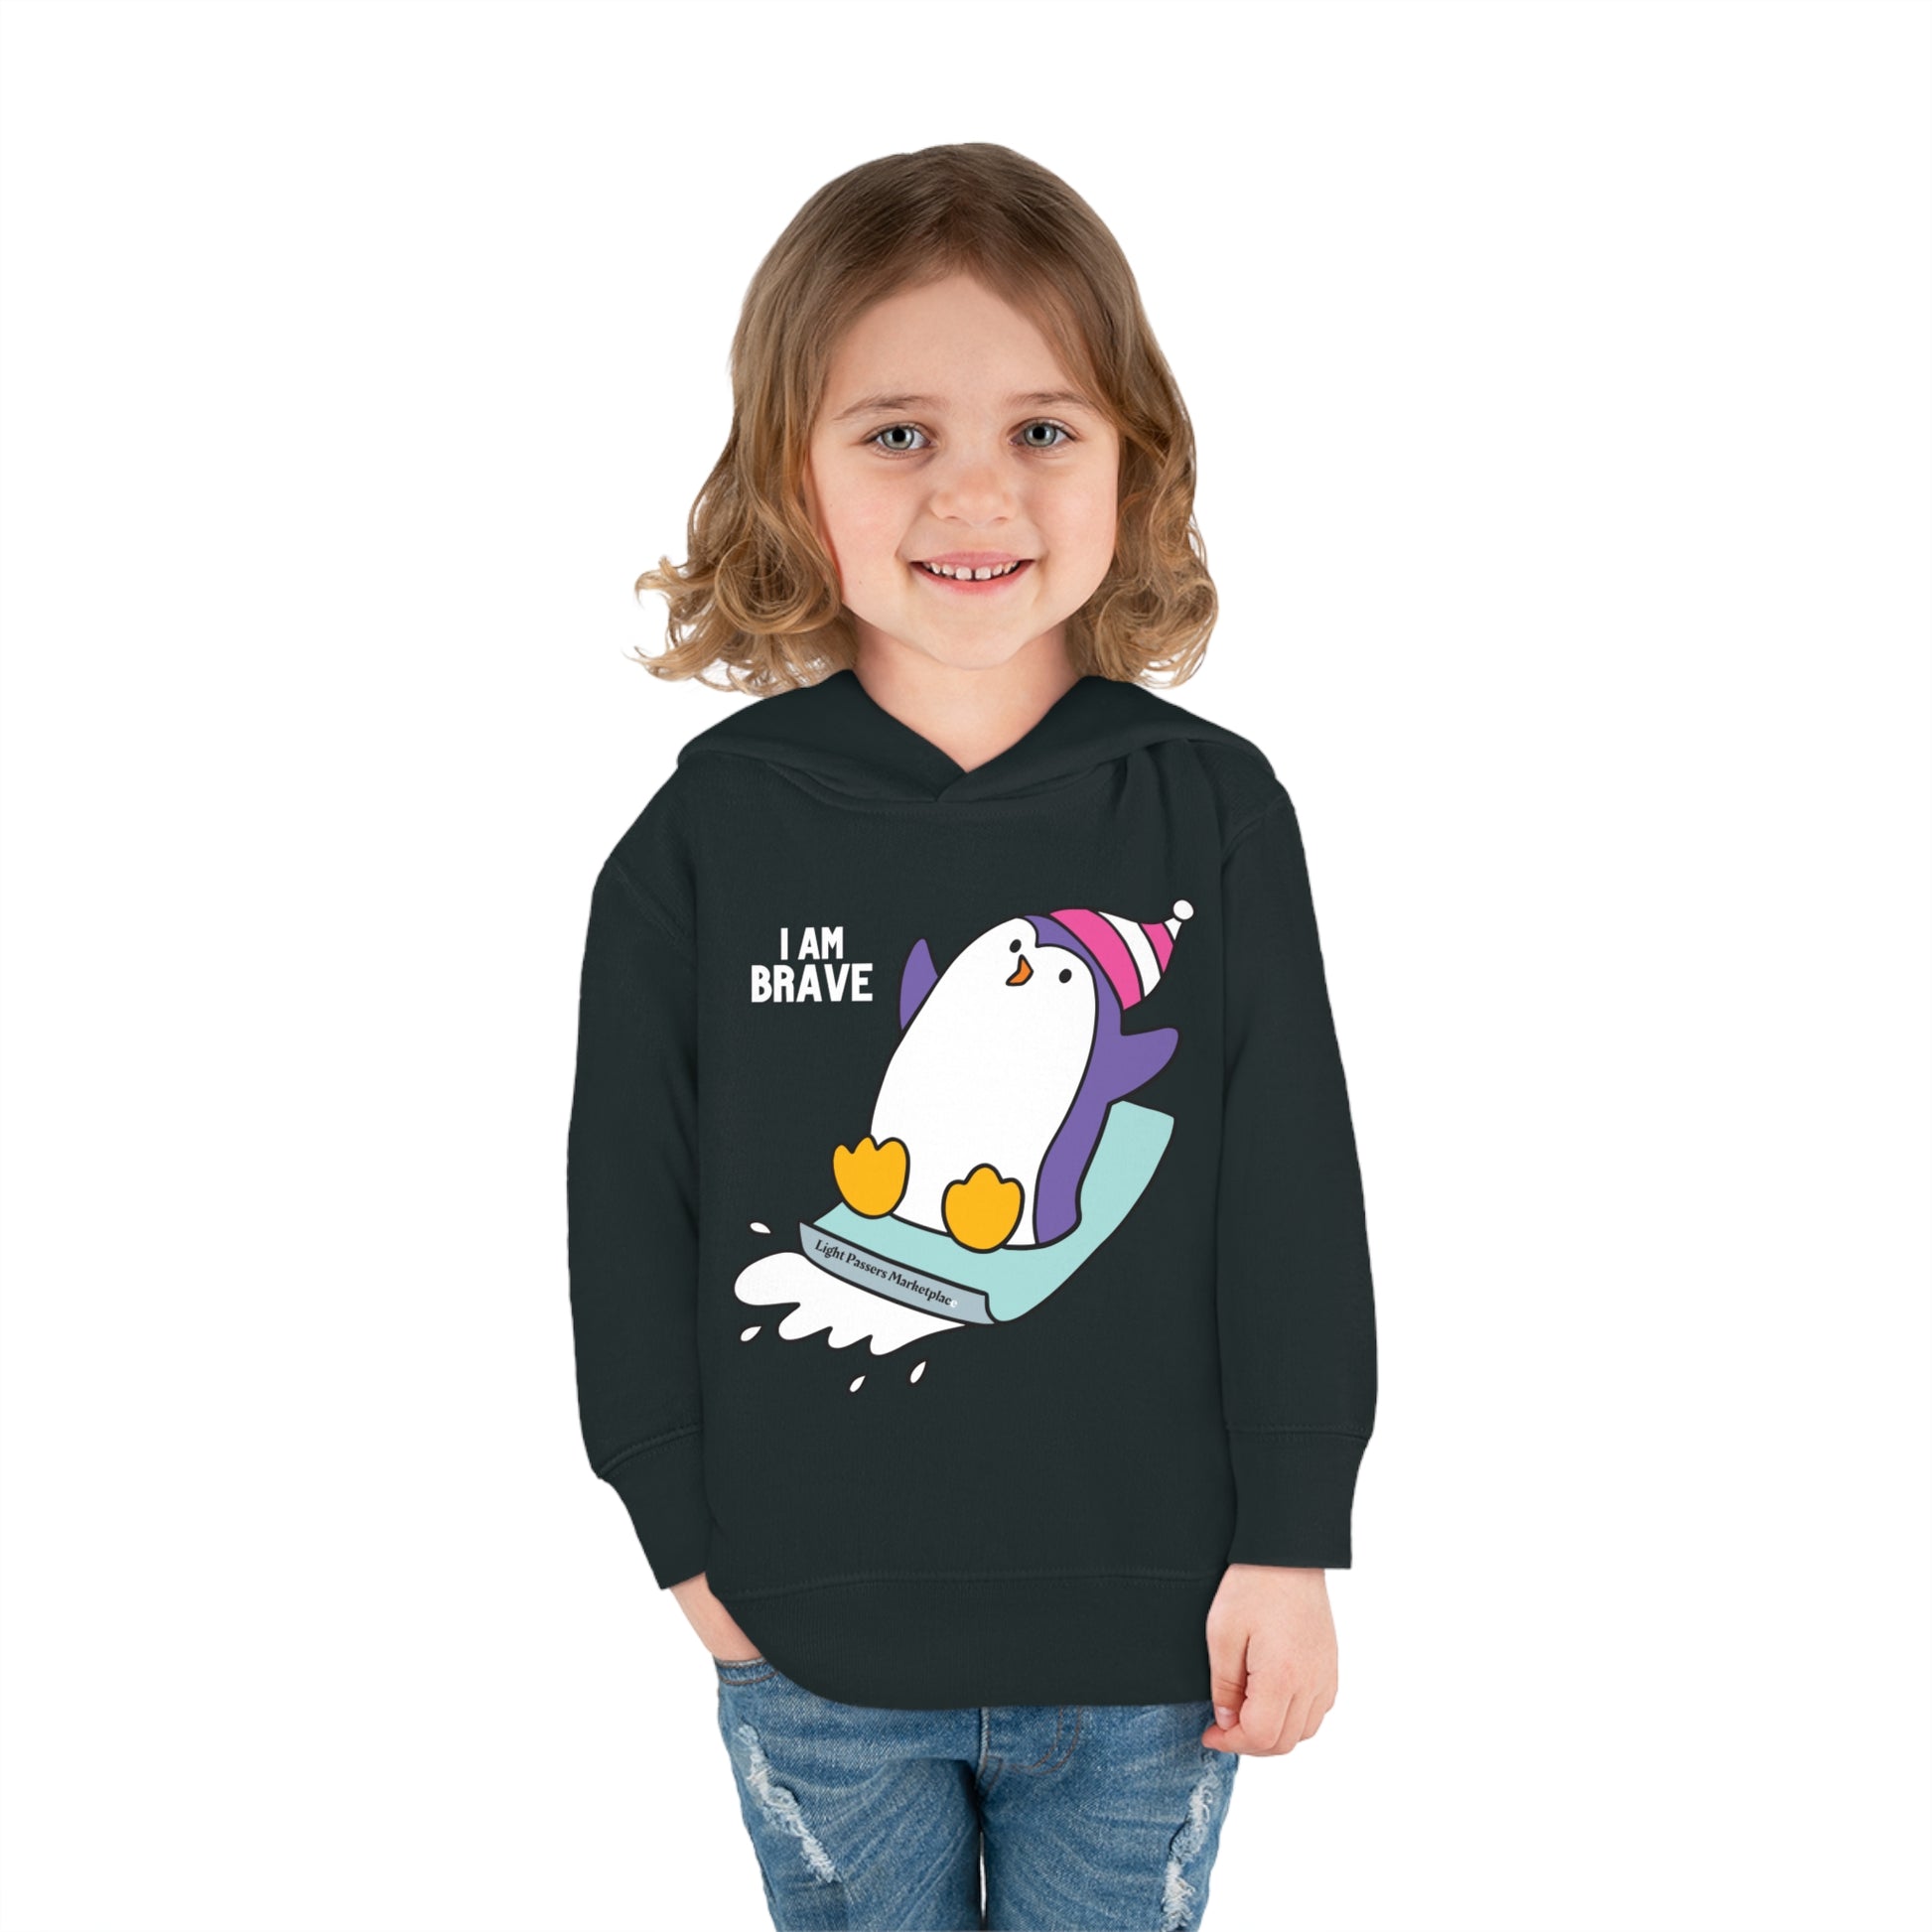 A child in a Brave Penguin Toddler Hooded Sweatshirt, smiling. Black sweatshirt with penguin design, cartoon penguin on snowboard visible. Jersey-lined hood, side seam pockets for cozy wear.